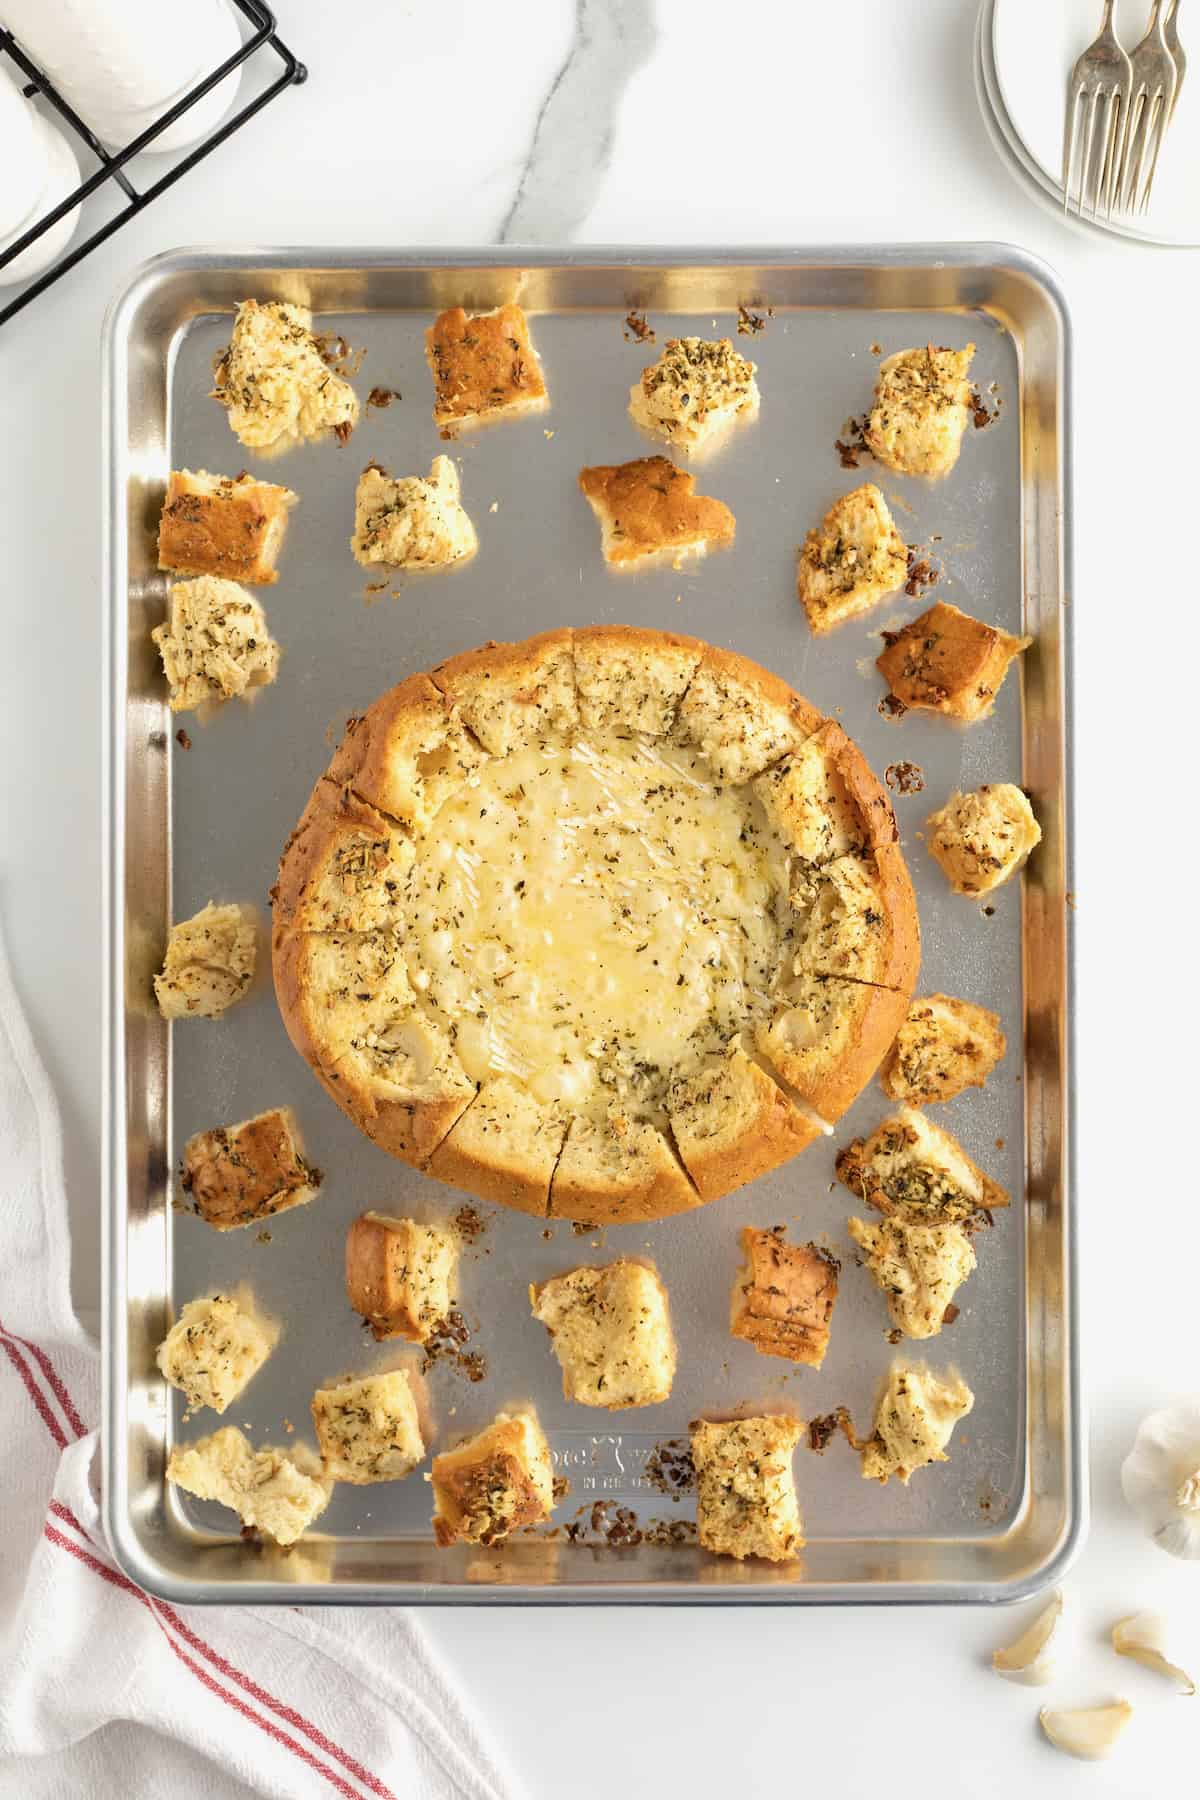 A baked bread bowl with wheel of brie inside arranged on baking sheet with bread chunks.